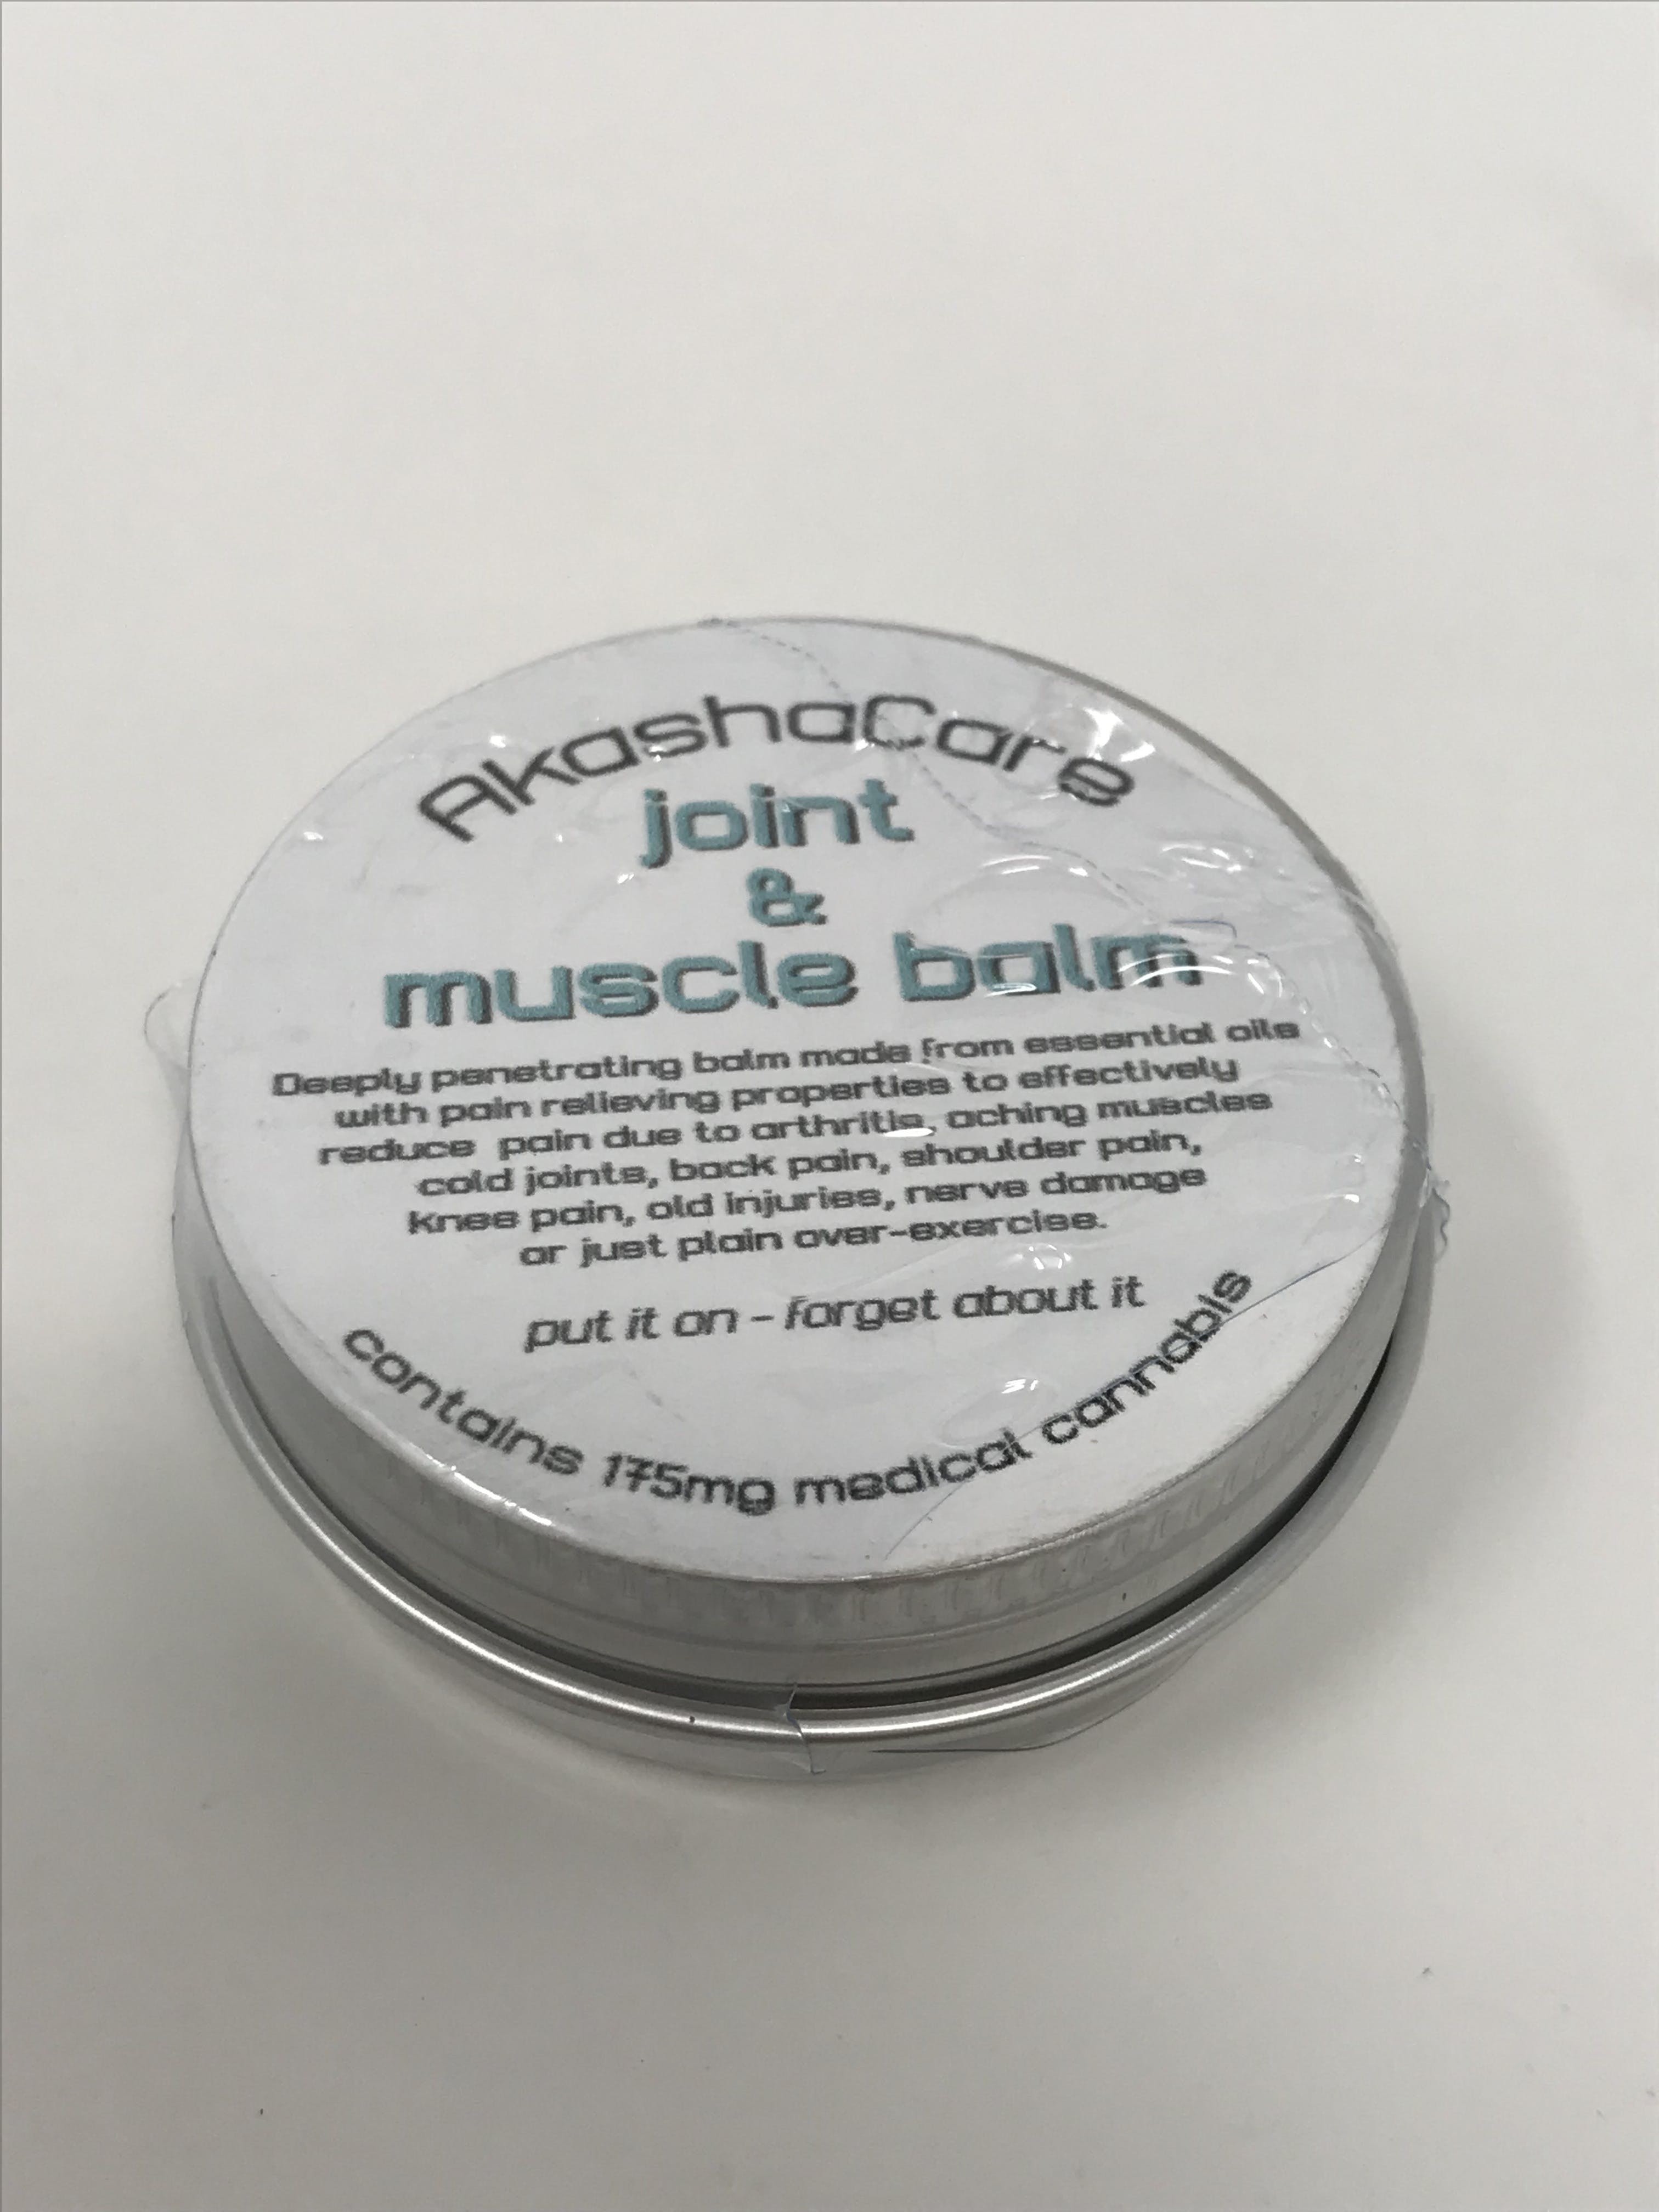 topicals-akasha-care-joint-a-muscle-balm-mini-175mg